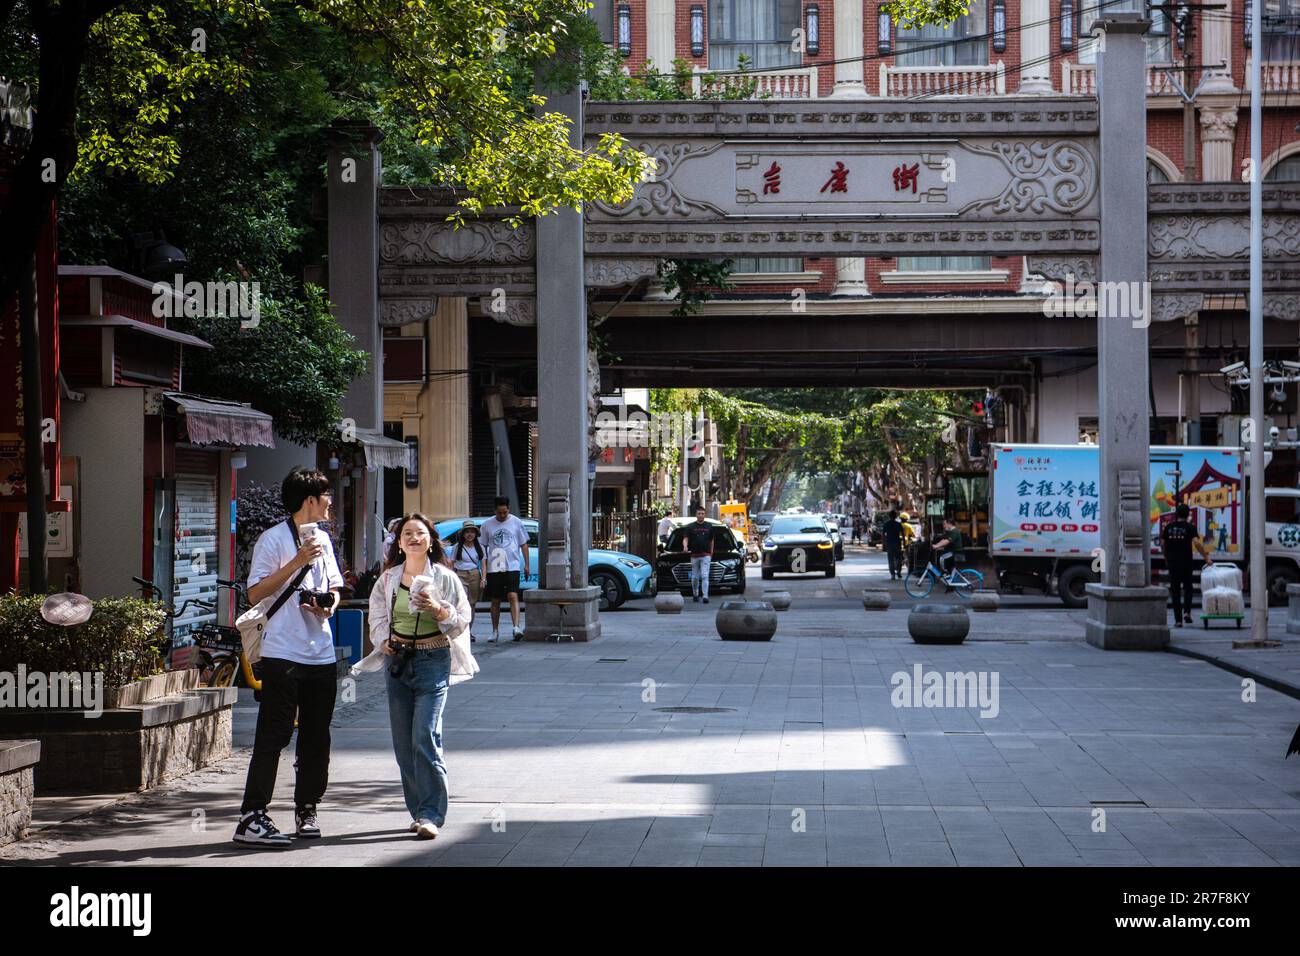 (230615) -- WUHAN, June 15, 2023 (Xinhua) -- Tourists visit Jiqing Street of Hankou historical area in Wuhan, central China's Hubei Province, June 6, 2023. Covering an area of 6.02 square kilometers, the Hankou historical area in the heart of Wuhan City's old town, boasts an abundance of historical and cultural heritages.    In recent years, Wuhan City has undertaken many urban renewal projects to revitalize this area's aging buildings. The historical area has seen significant changes through those efforts. (Xinhua/Wu Zhizun) Stock Photo